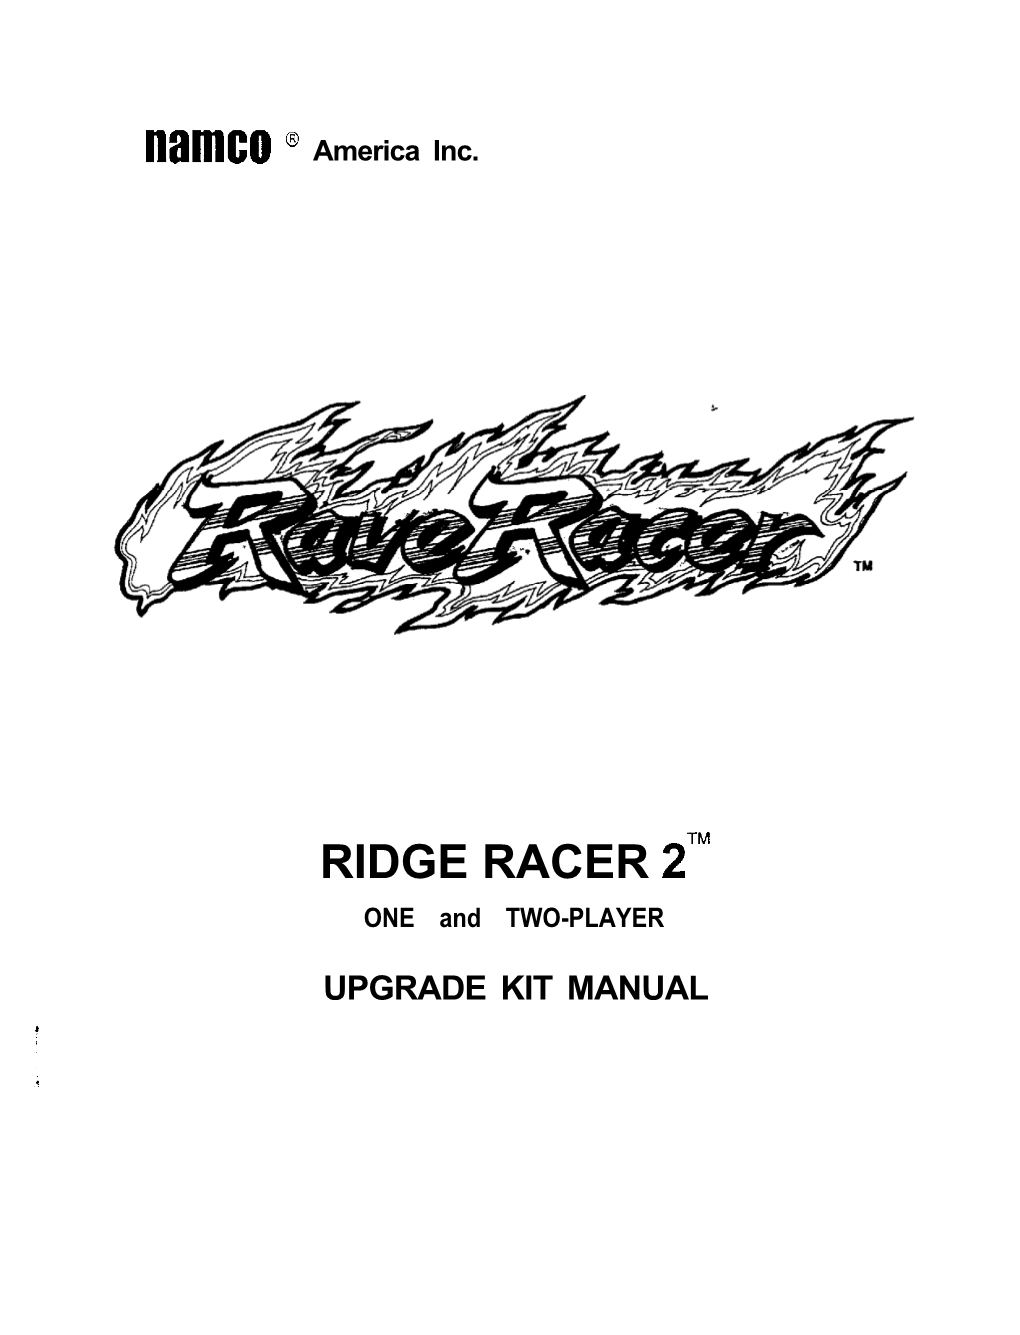 RIDGE RACER 2TM ONE and TWO-PLAYER